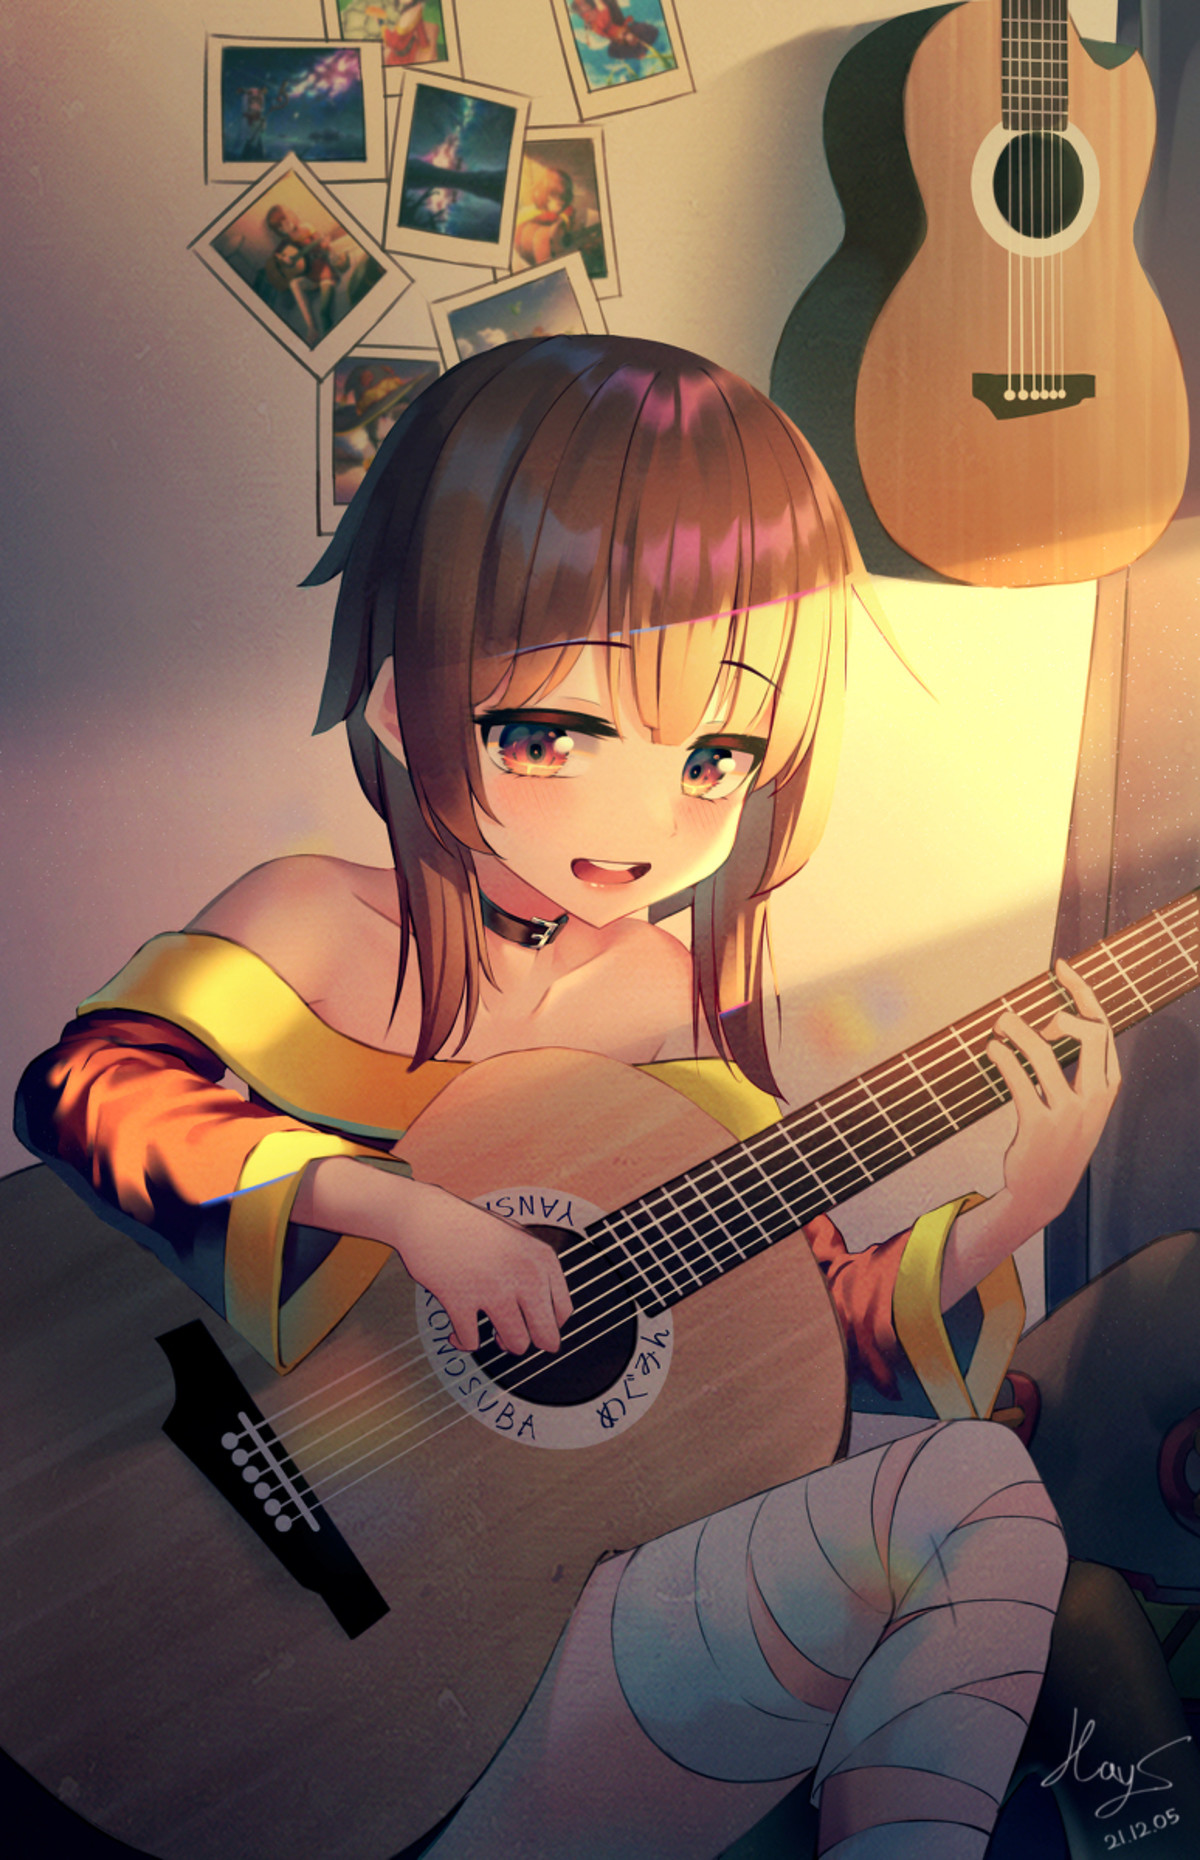 Daily Megu - 1013: Megu plays Wonderwall. join list: DailySplosion (826 subs)Mention History Source: .. She weighs the same as that guitar